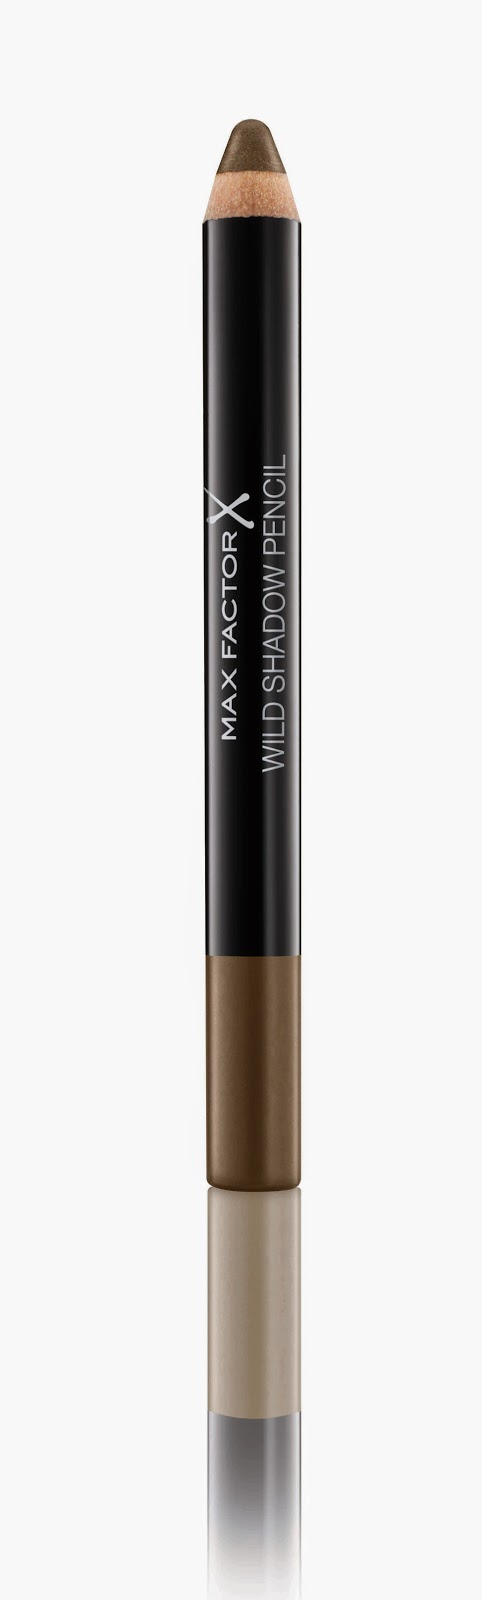 Think Beauty Try Beauty: Max Factor Wild Shadow Pencil 2-in-1 Gel Shadow and Liner - super soft, light and blendable